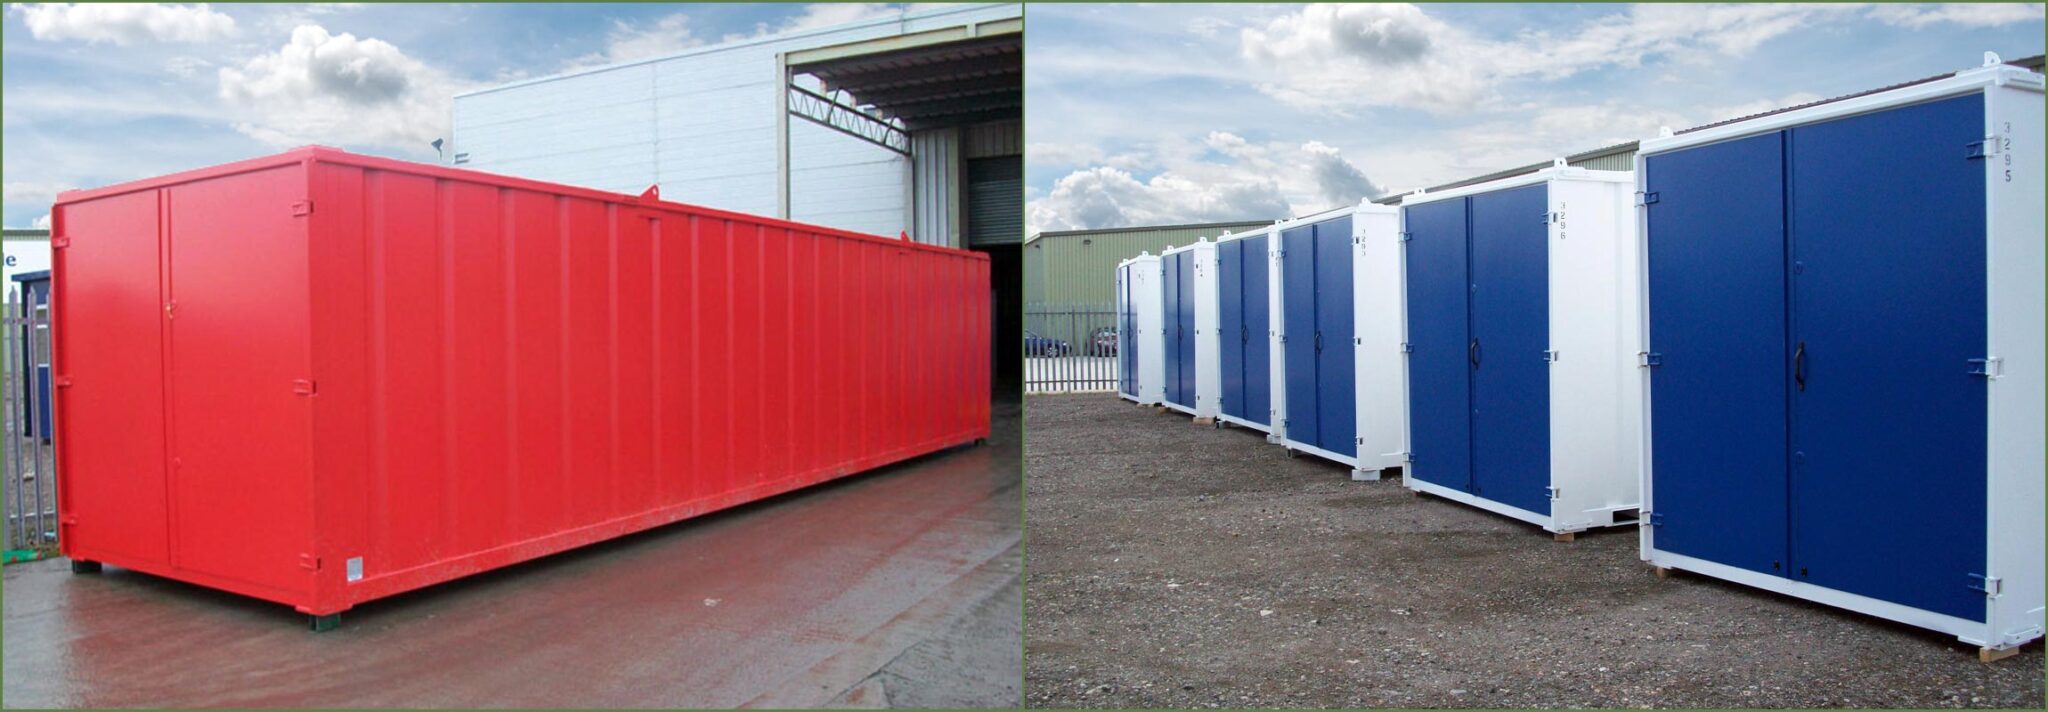 Providers of Secure Steel Container Buildings UK